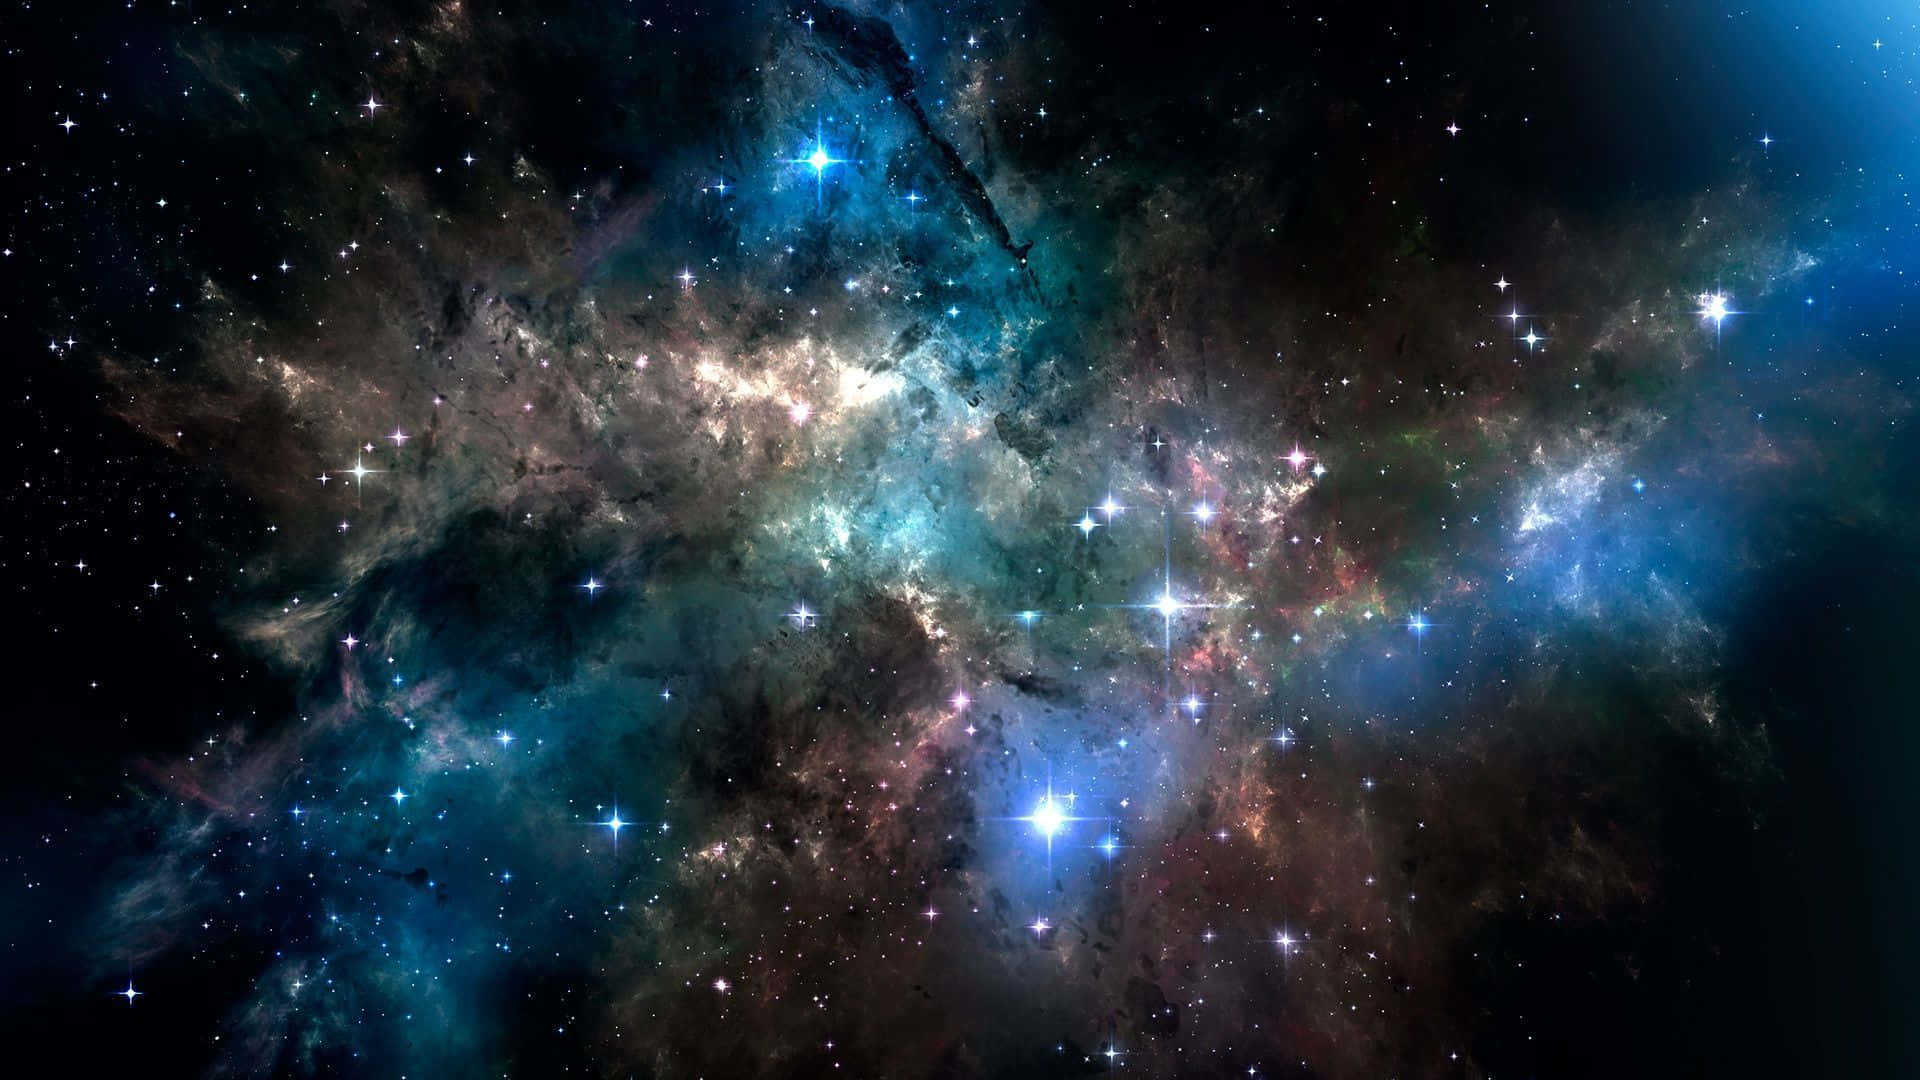 real galaxy pictures - Google Search | Hd cool wallpapers, Wallpaper,  Desktop wallpaper